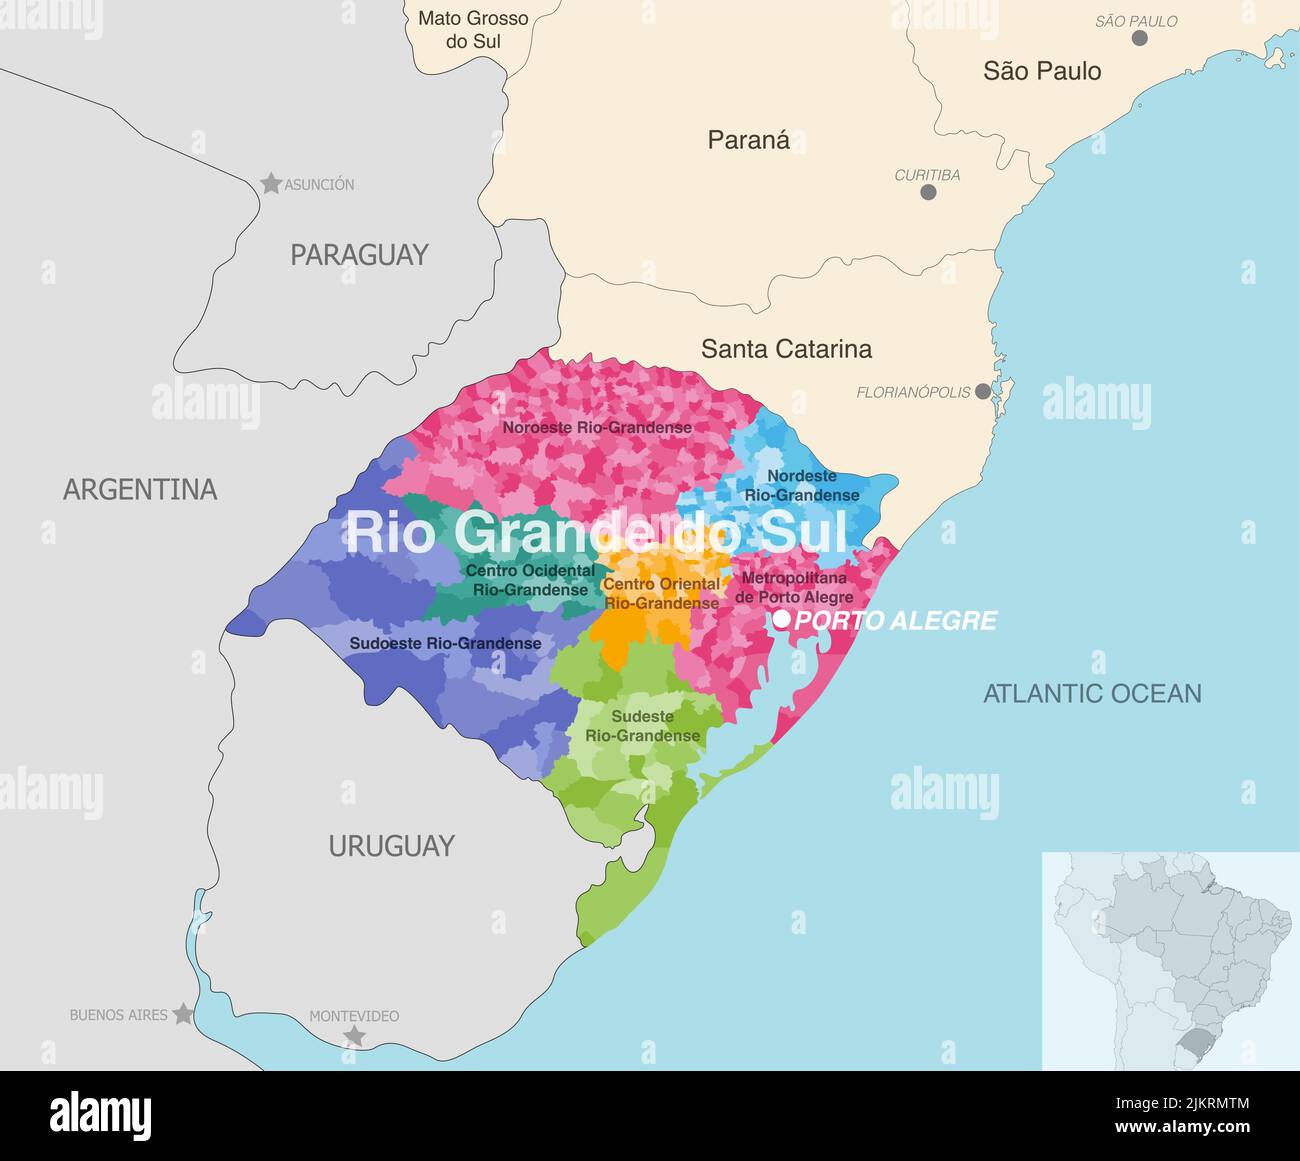 Brazil state Rio Grande do Sul administrative map showing municipalities colored by state regions (mesoregions) Stock Vector